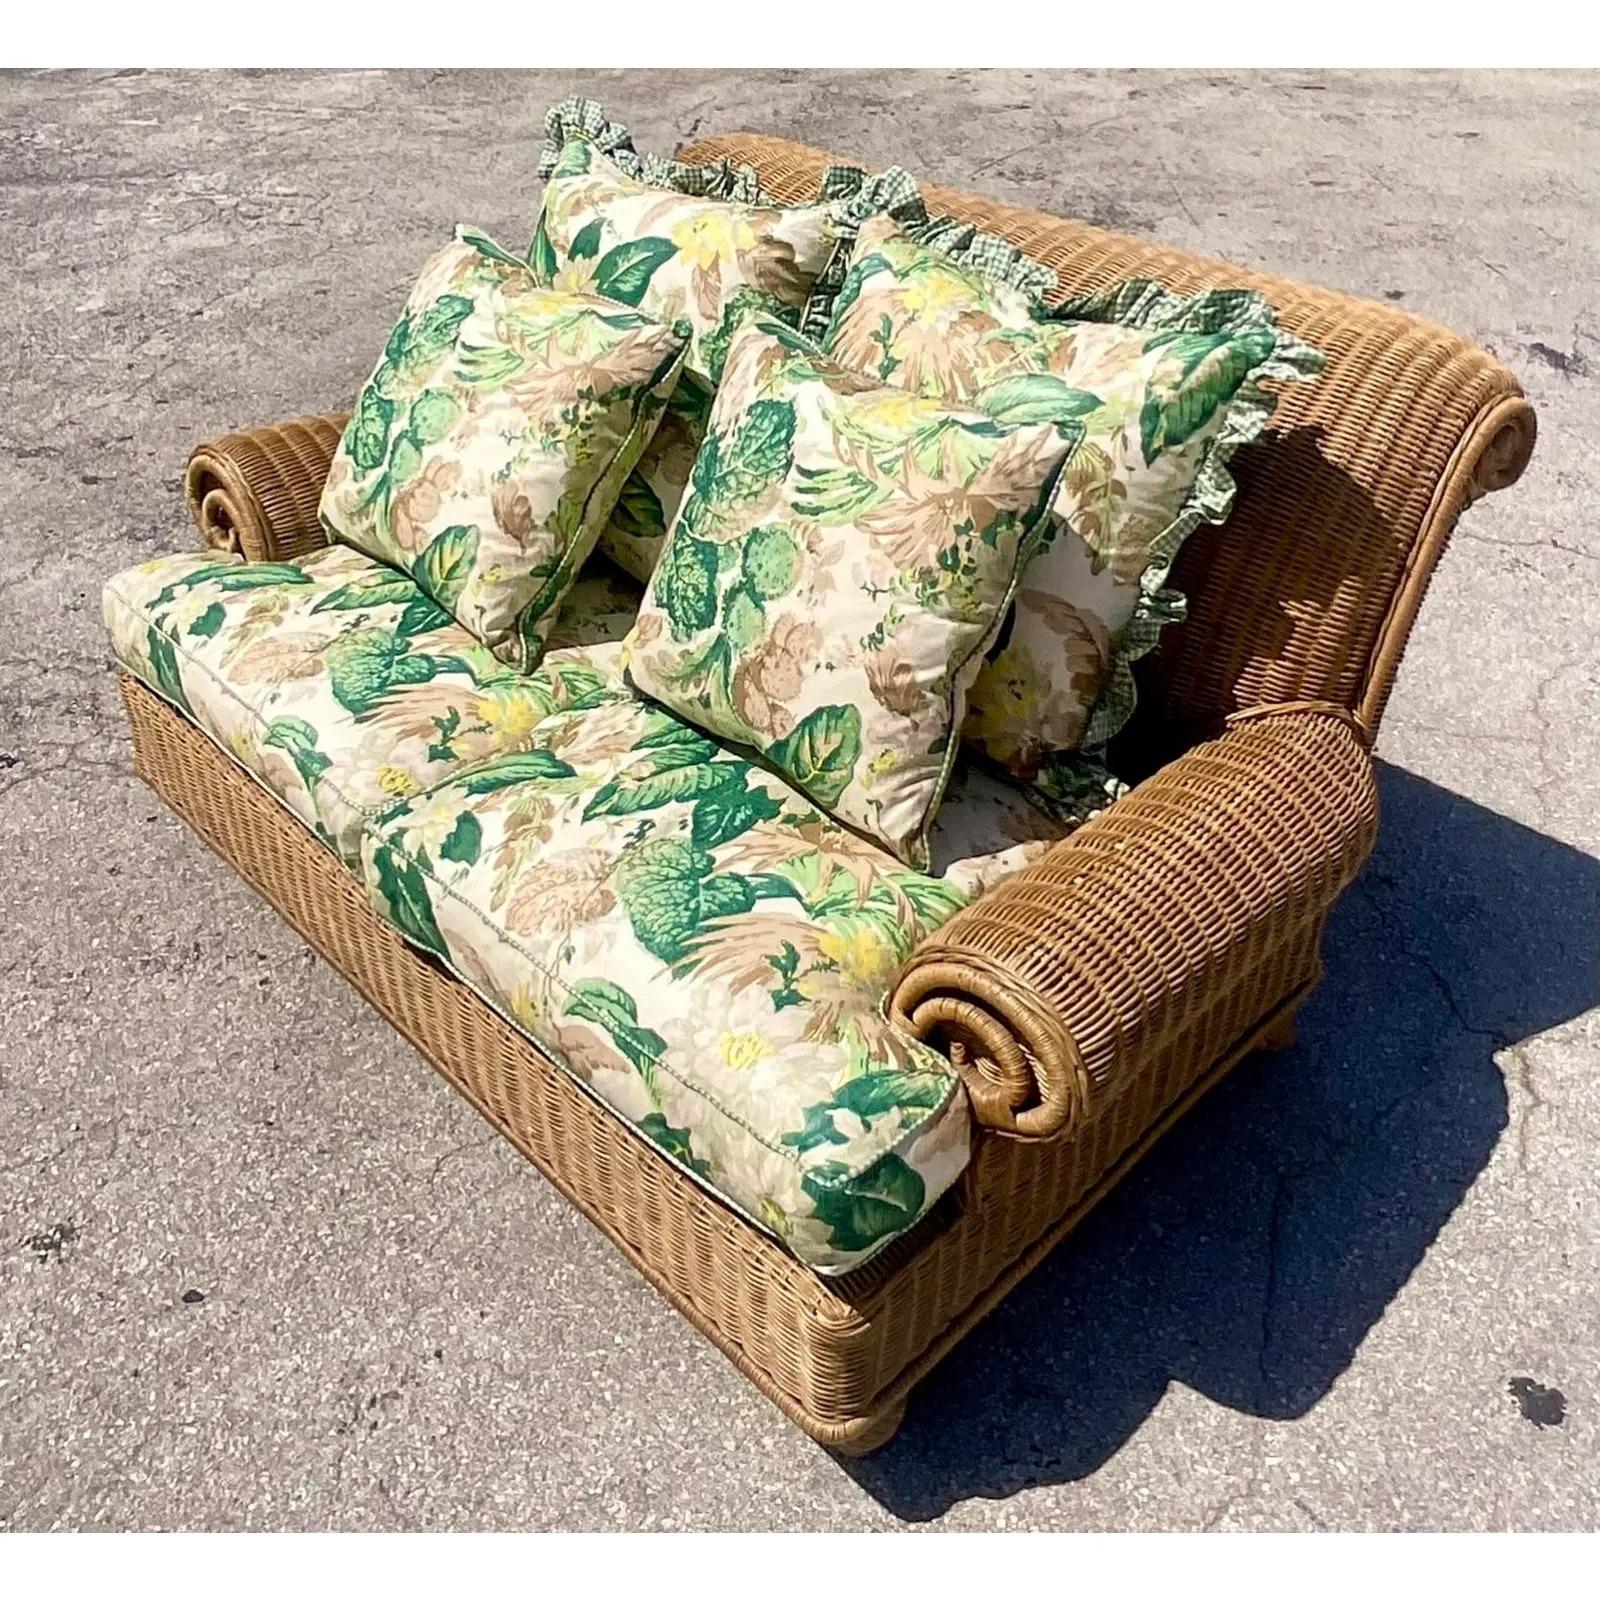 Upholstery Vintage Coastal Ralph Lauren Woven Rattan Roll Arm Loveseat with Floral Cushions